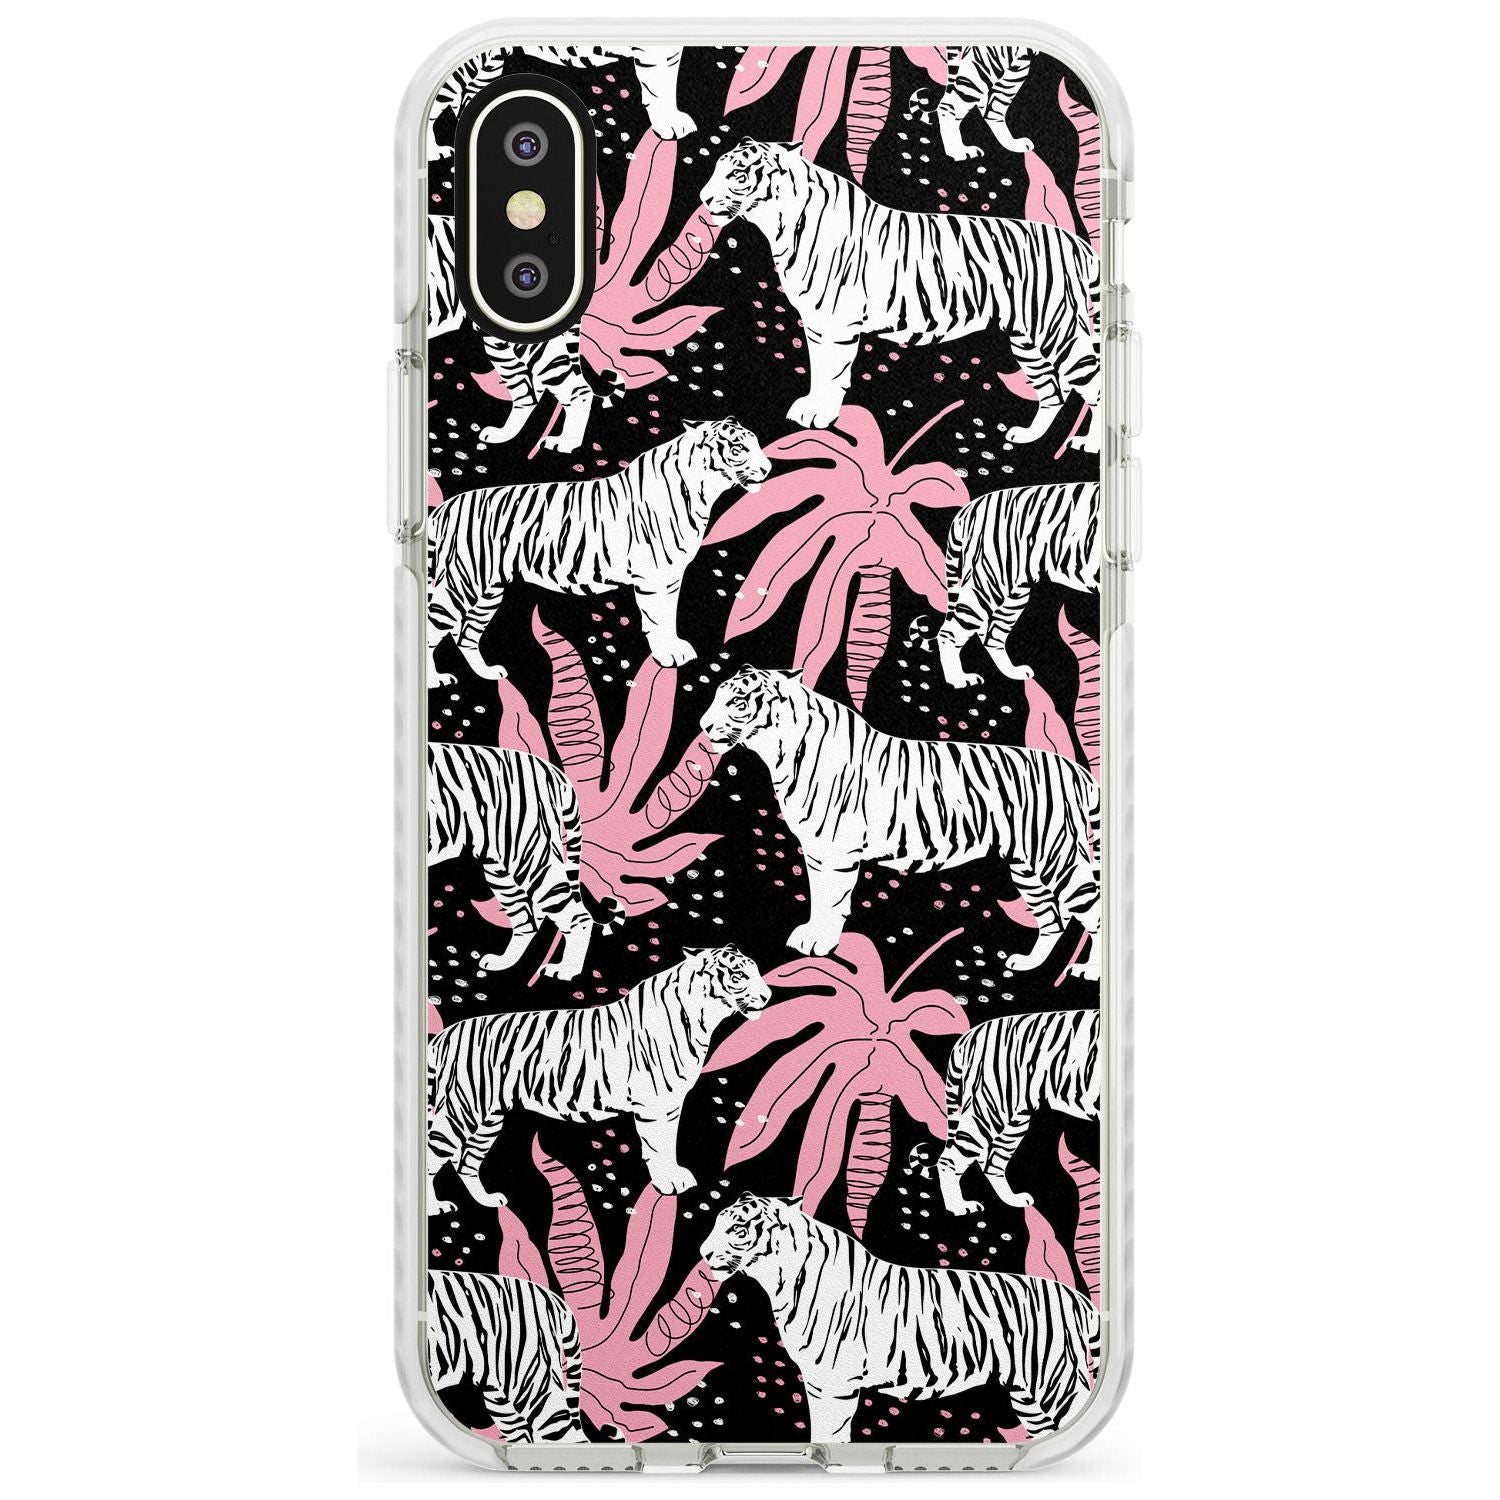 White Tigers on Black Pattern Impact Phone Case for iPhone X XS Max XR